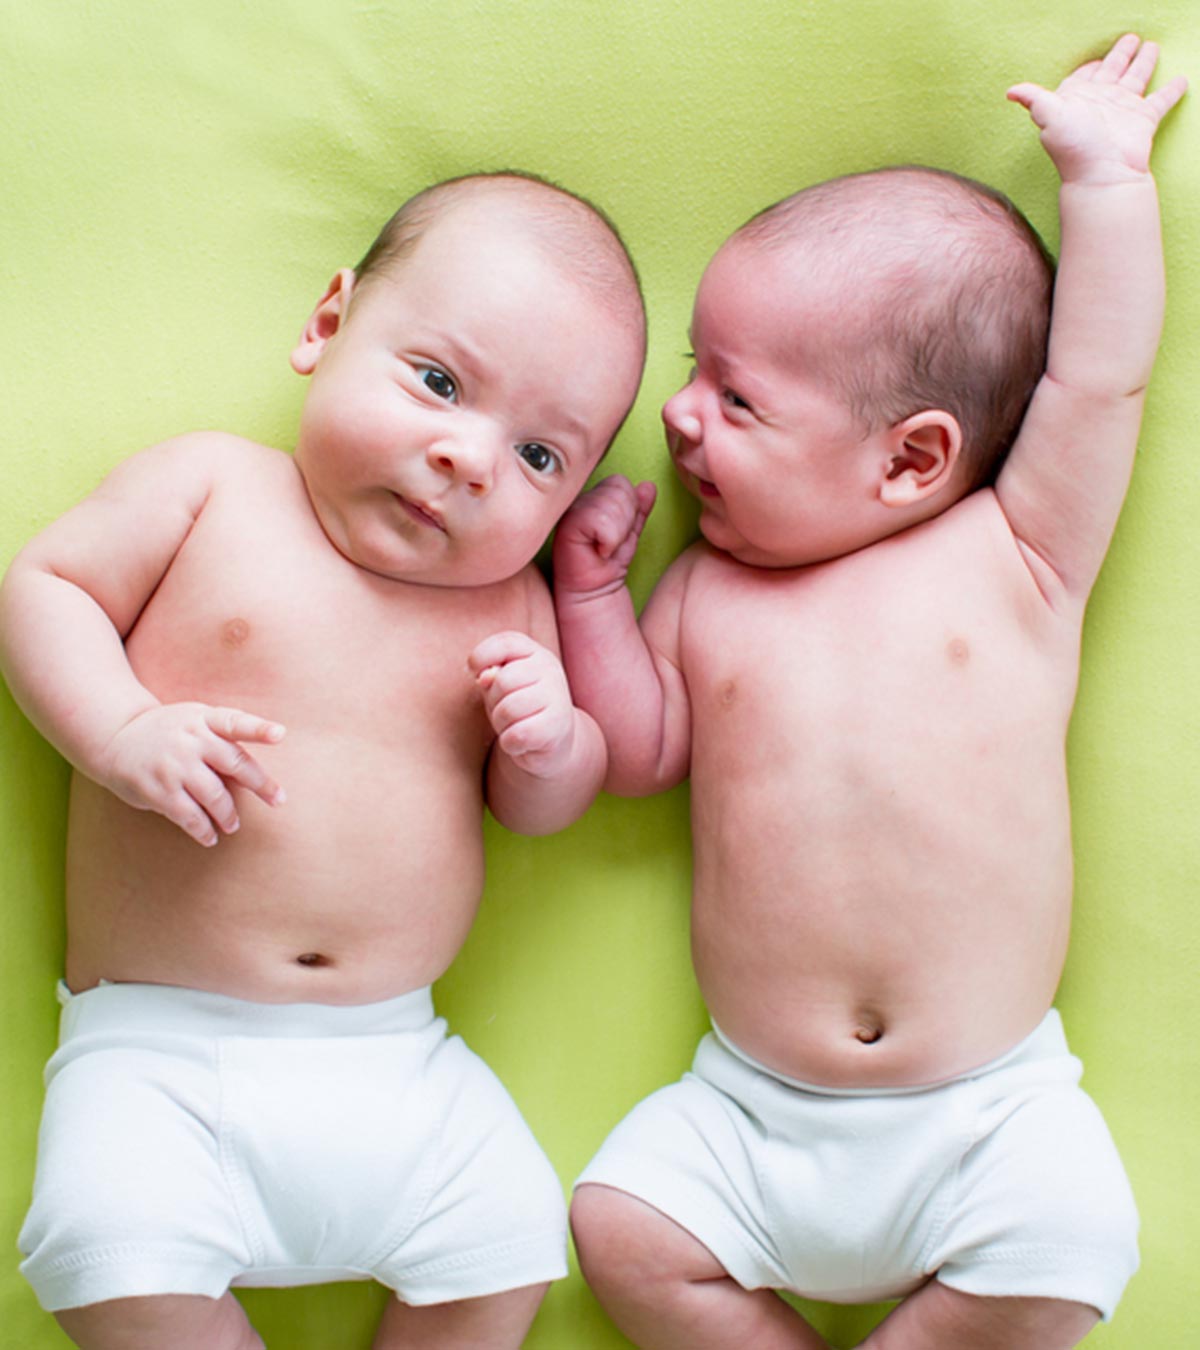 7 Bizarre But True Facts About Babies